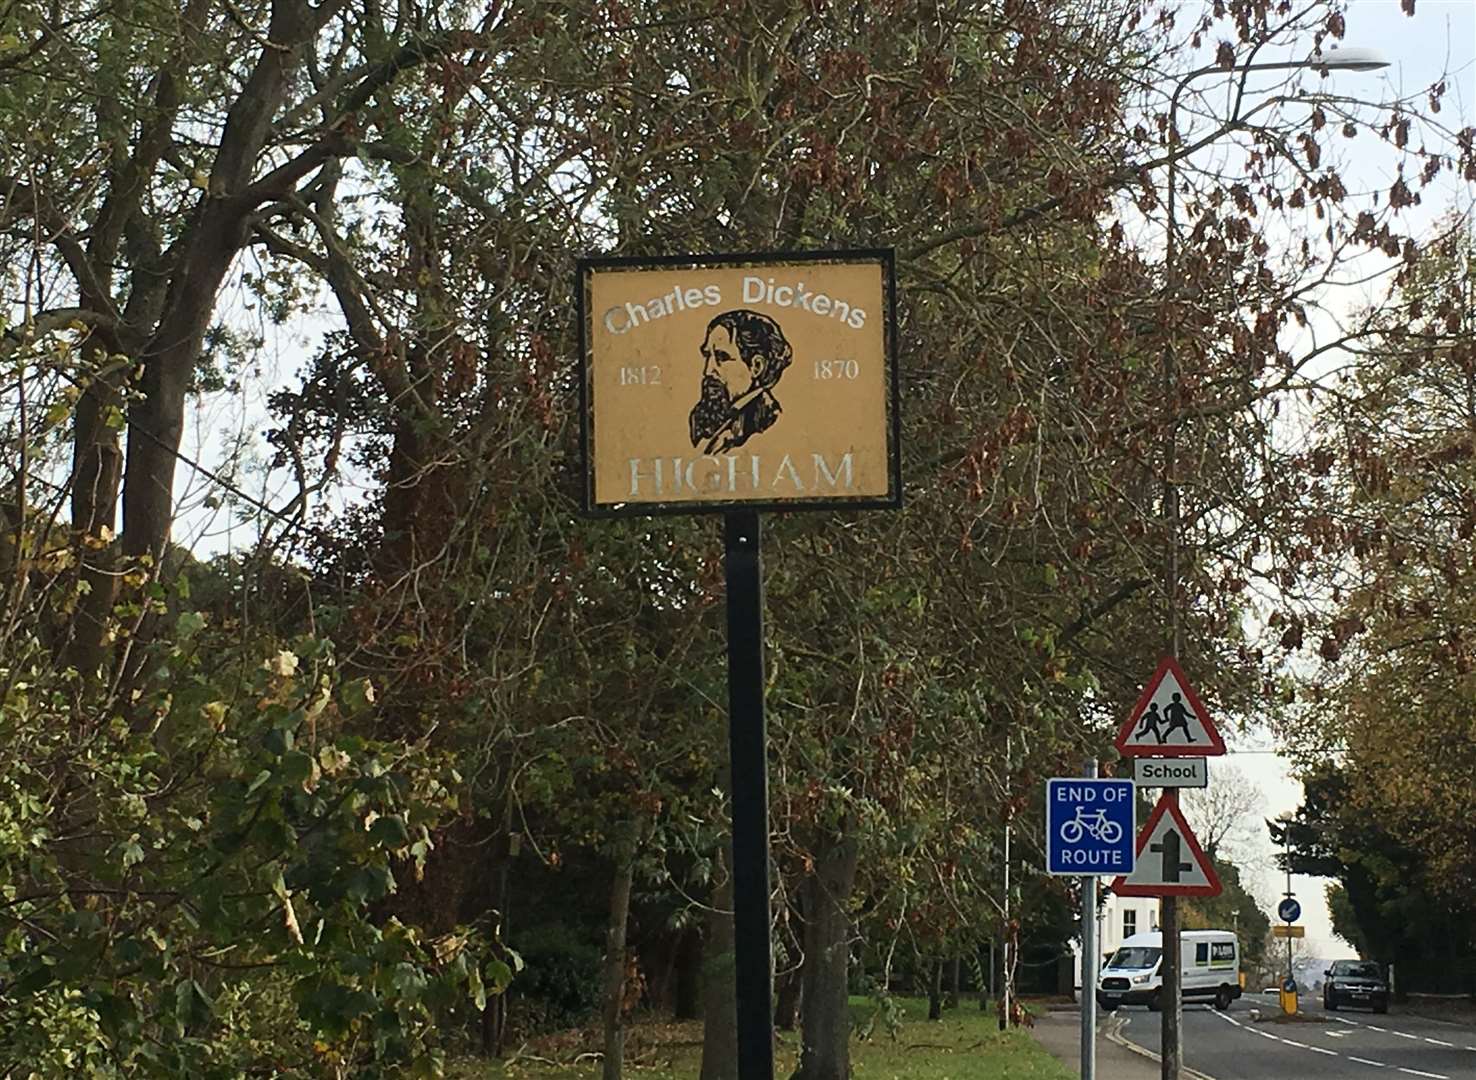 Higham's village sign is a nod Charles' Dickens history in the area, which he details in his letters